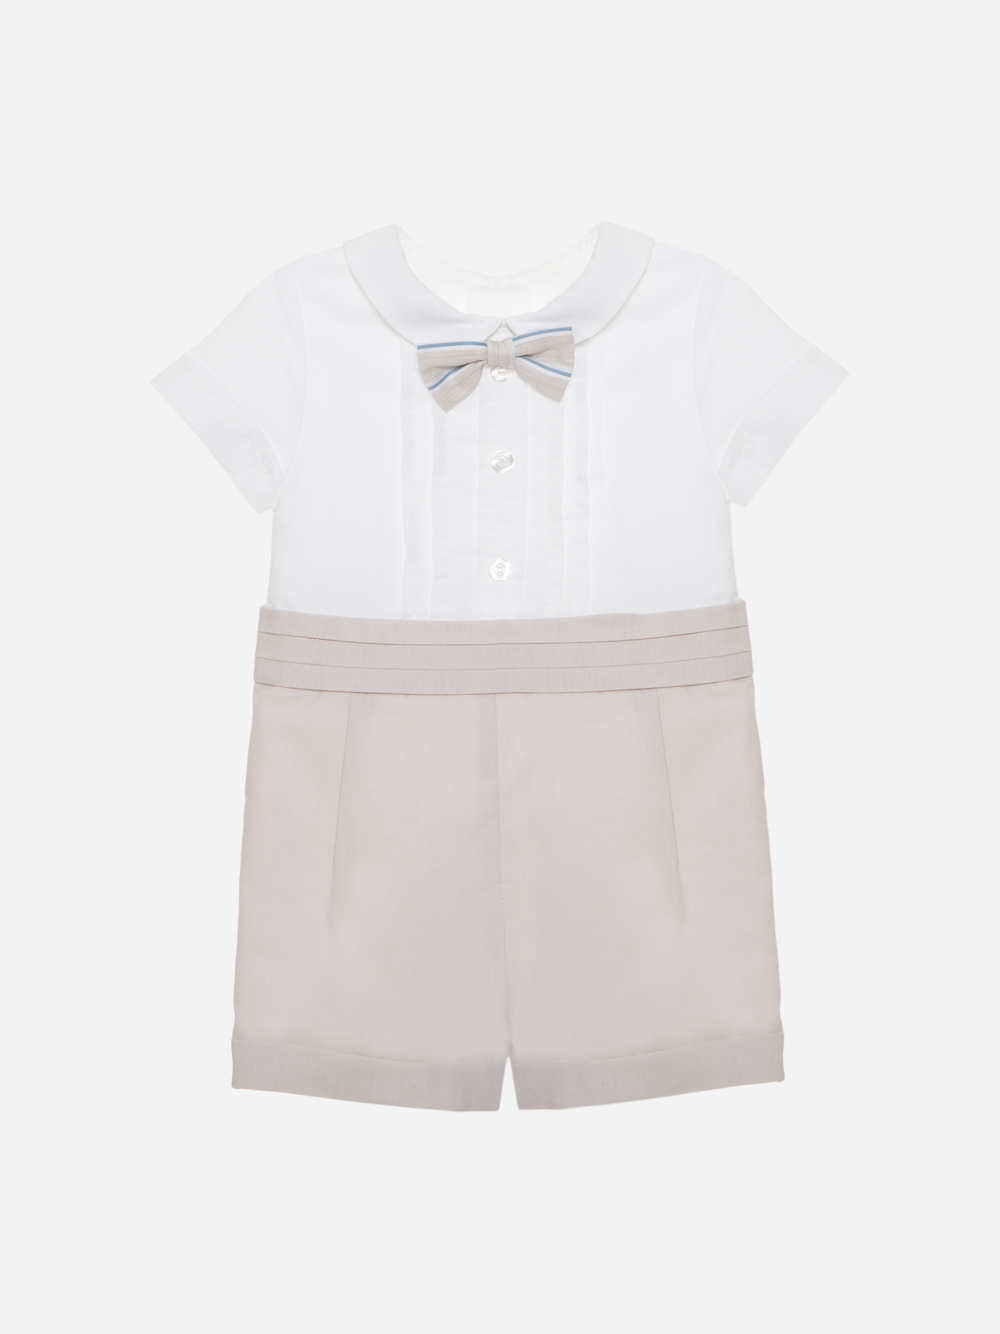 Boys beige jumpsuit with bow